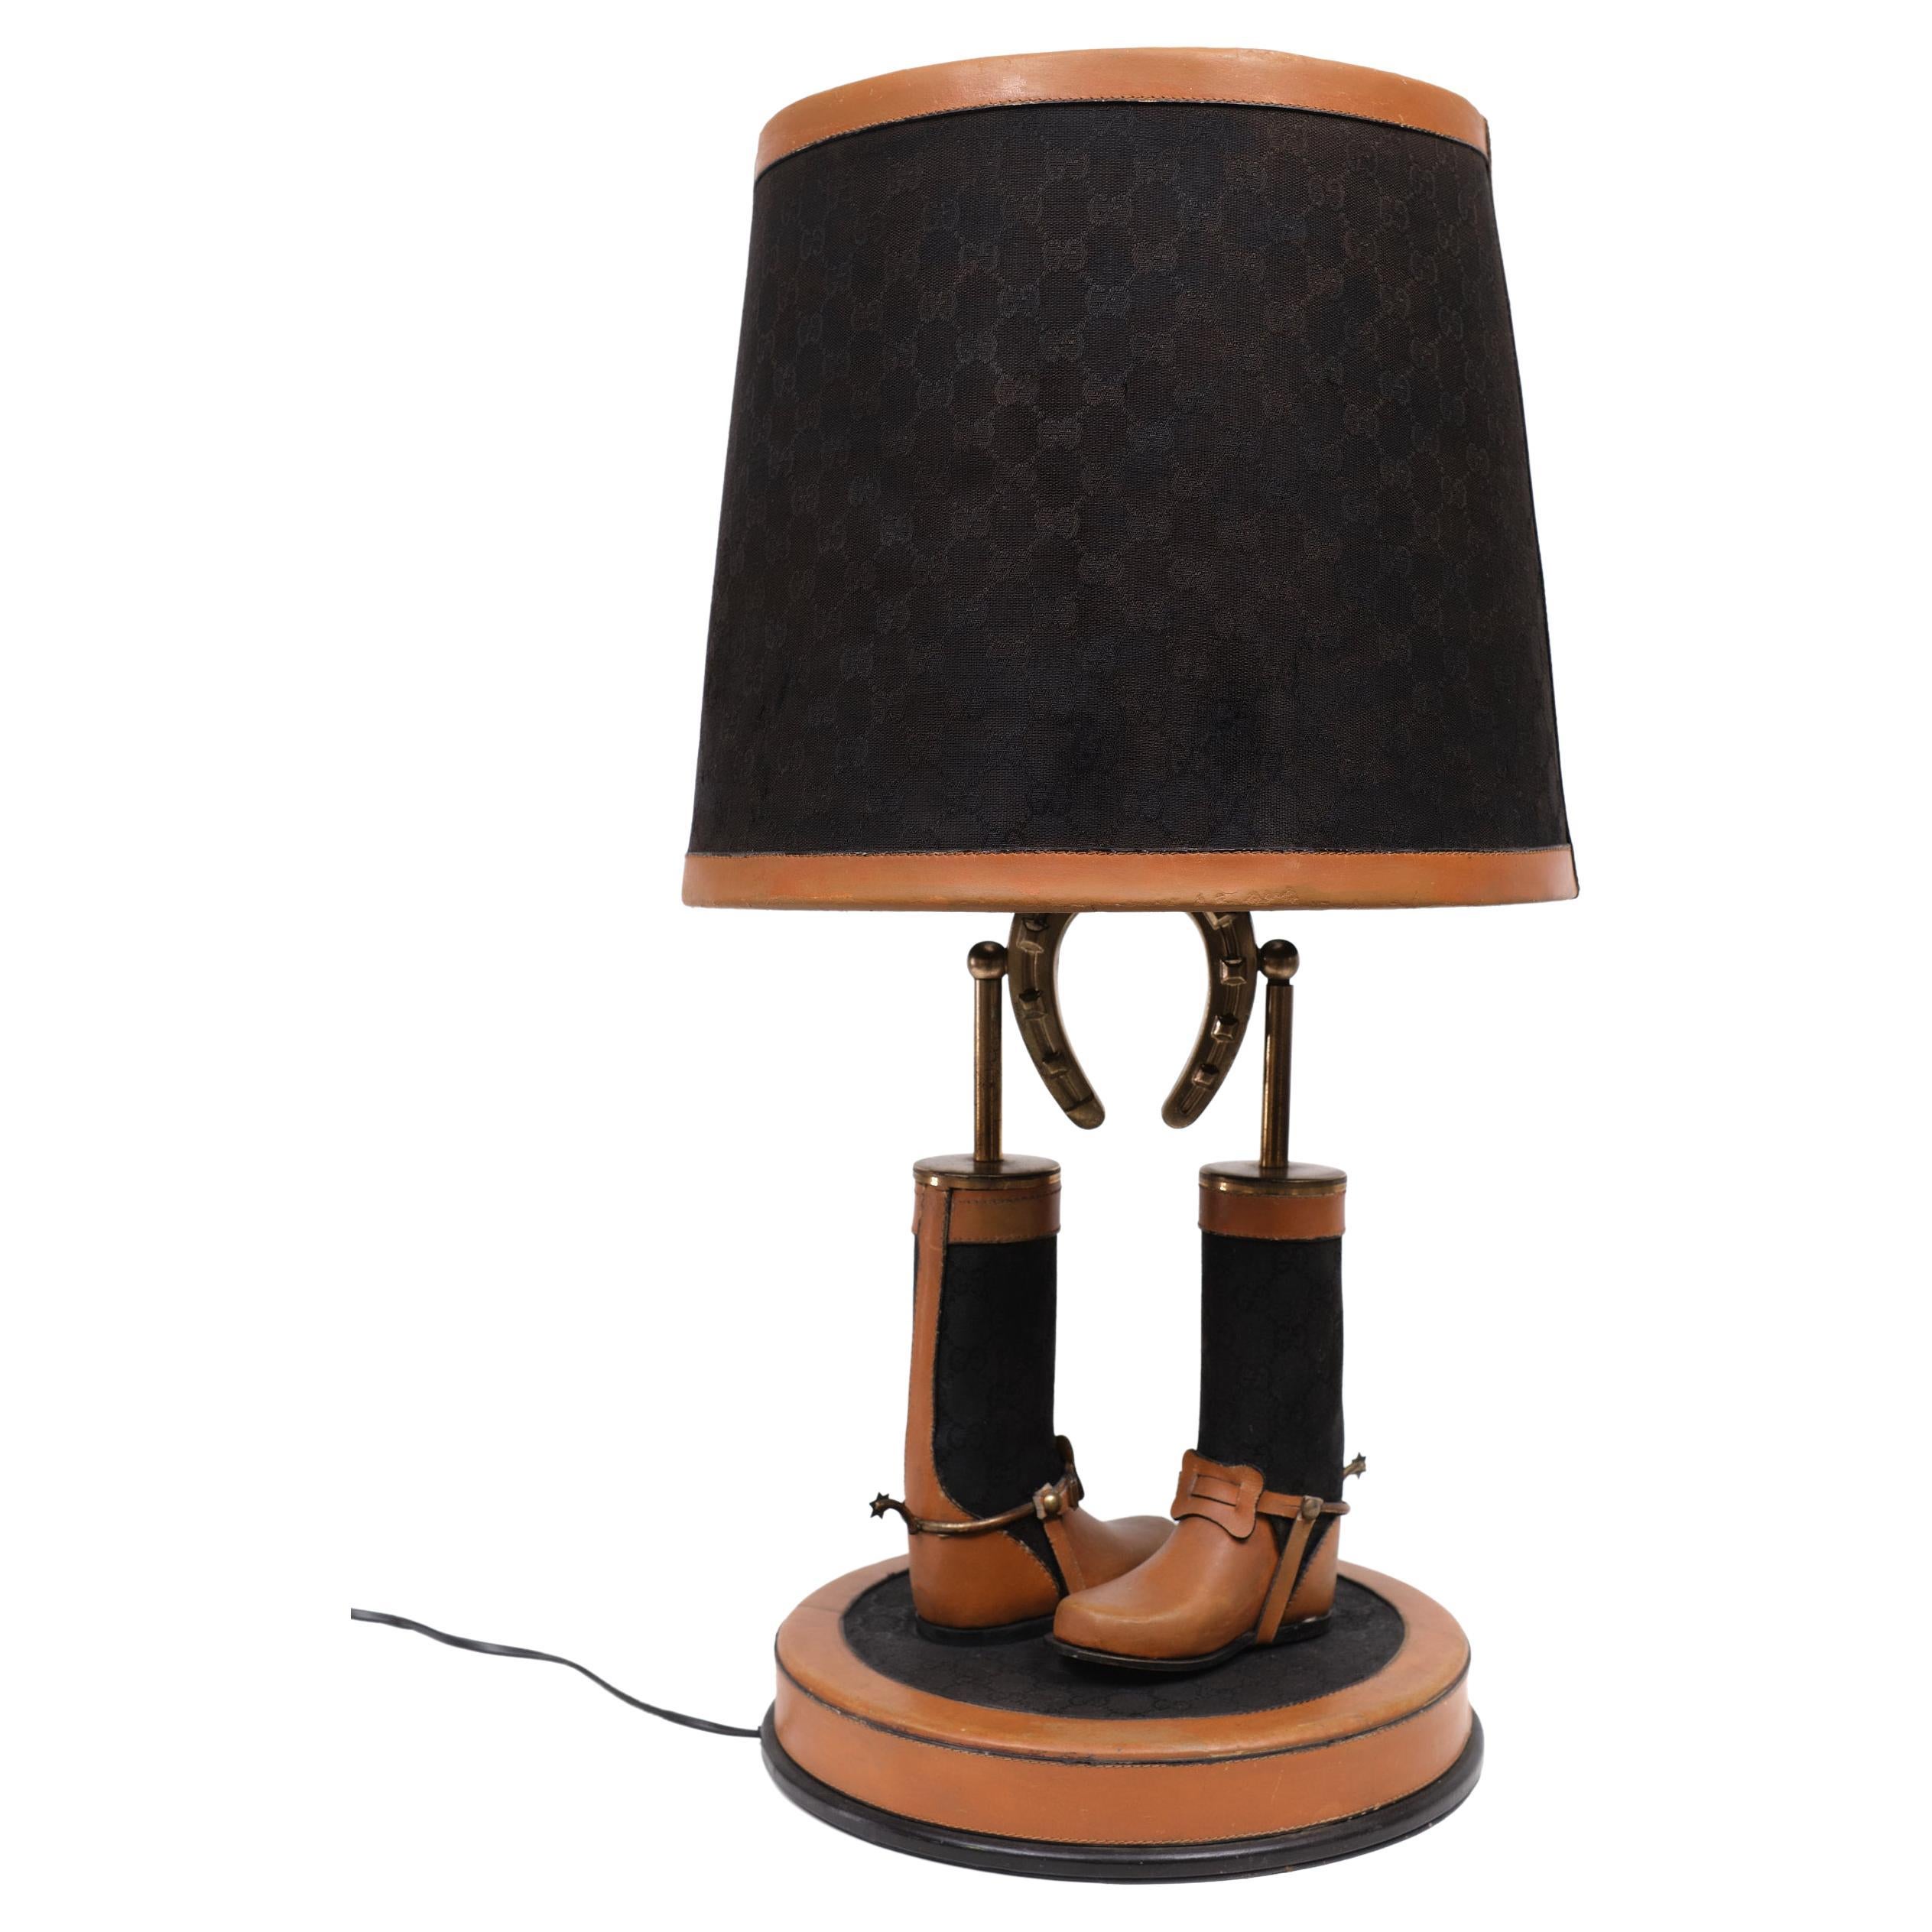 Unique and exclusive table lamp by Gucci Italy with boots and horseshoe and with stirrups.
Metal, leather, webbing and Gucci monogrammed fabric. These lamps were possibly not for retail but part of the display in the Gucci Stores.
There is one